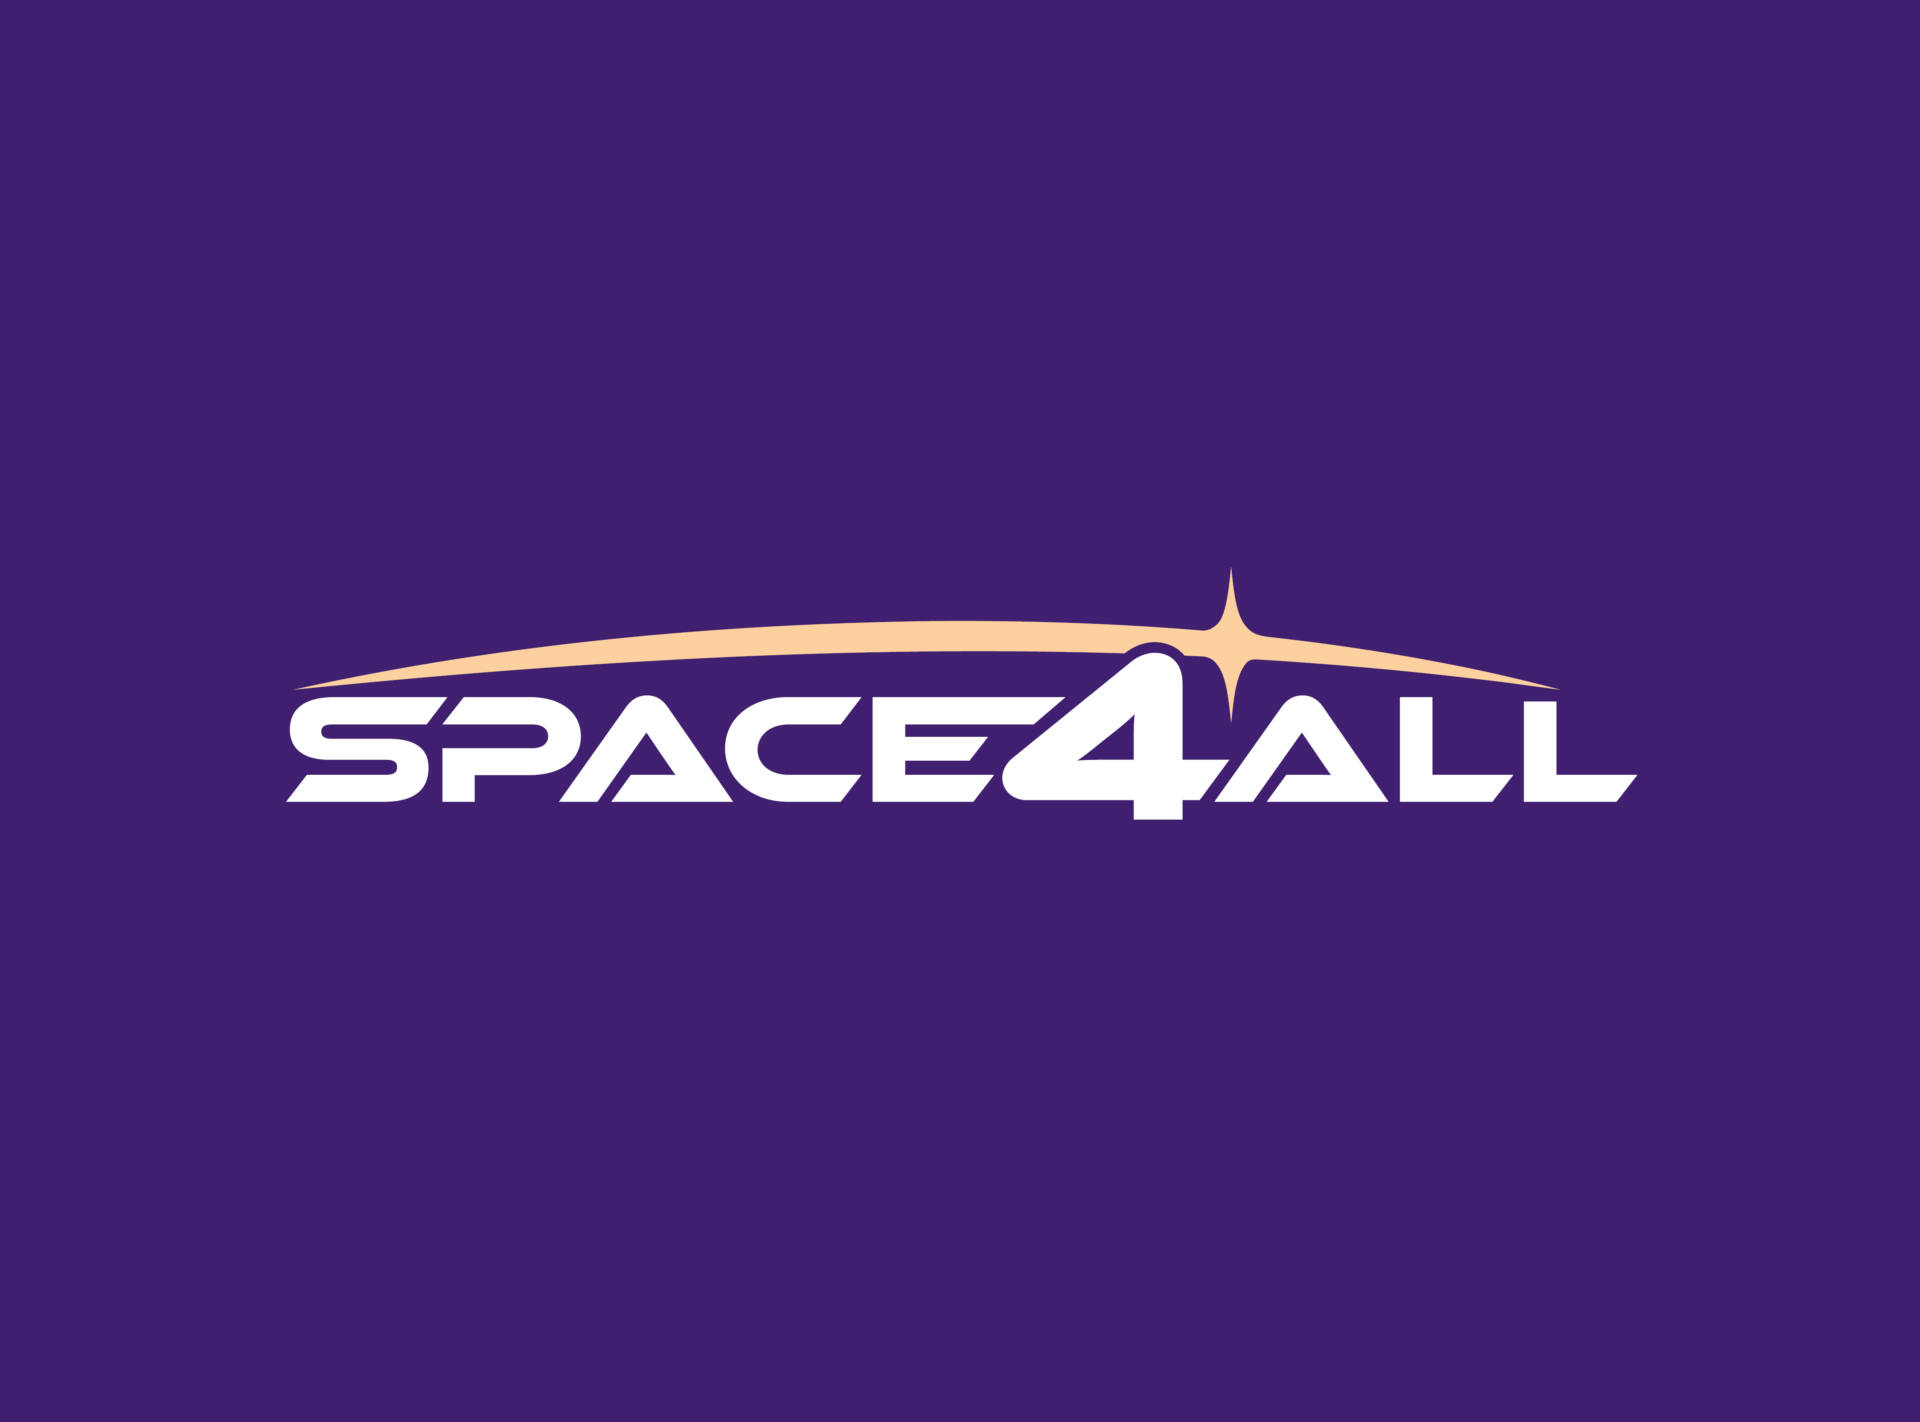 Space4All Brand